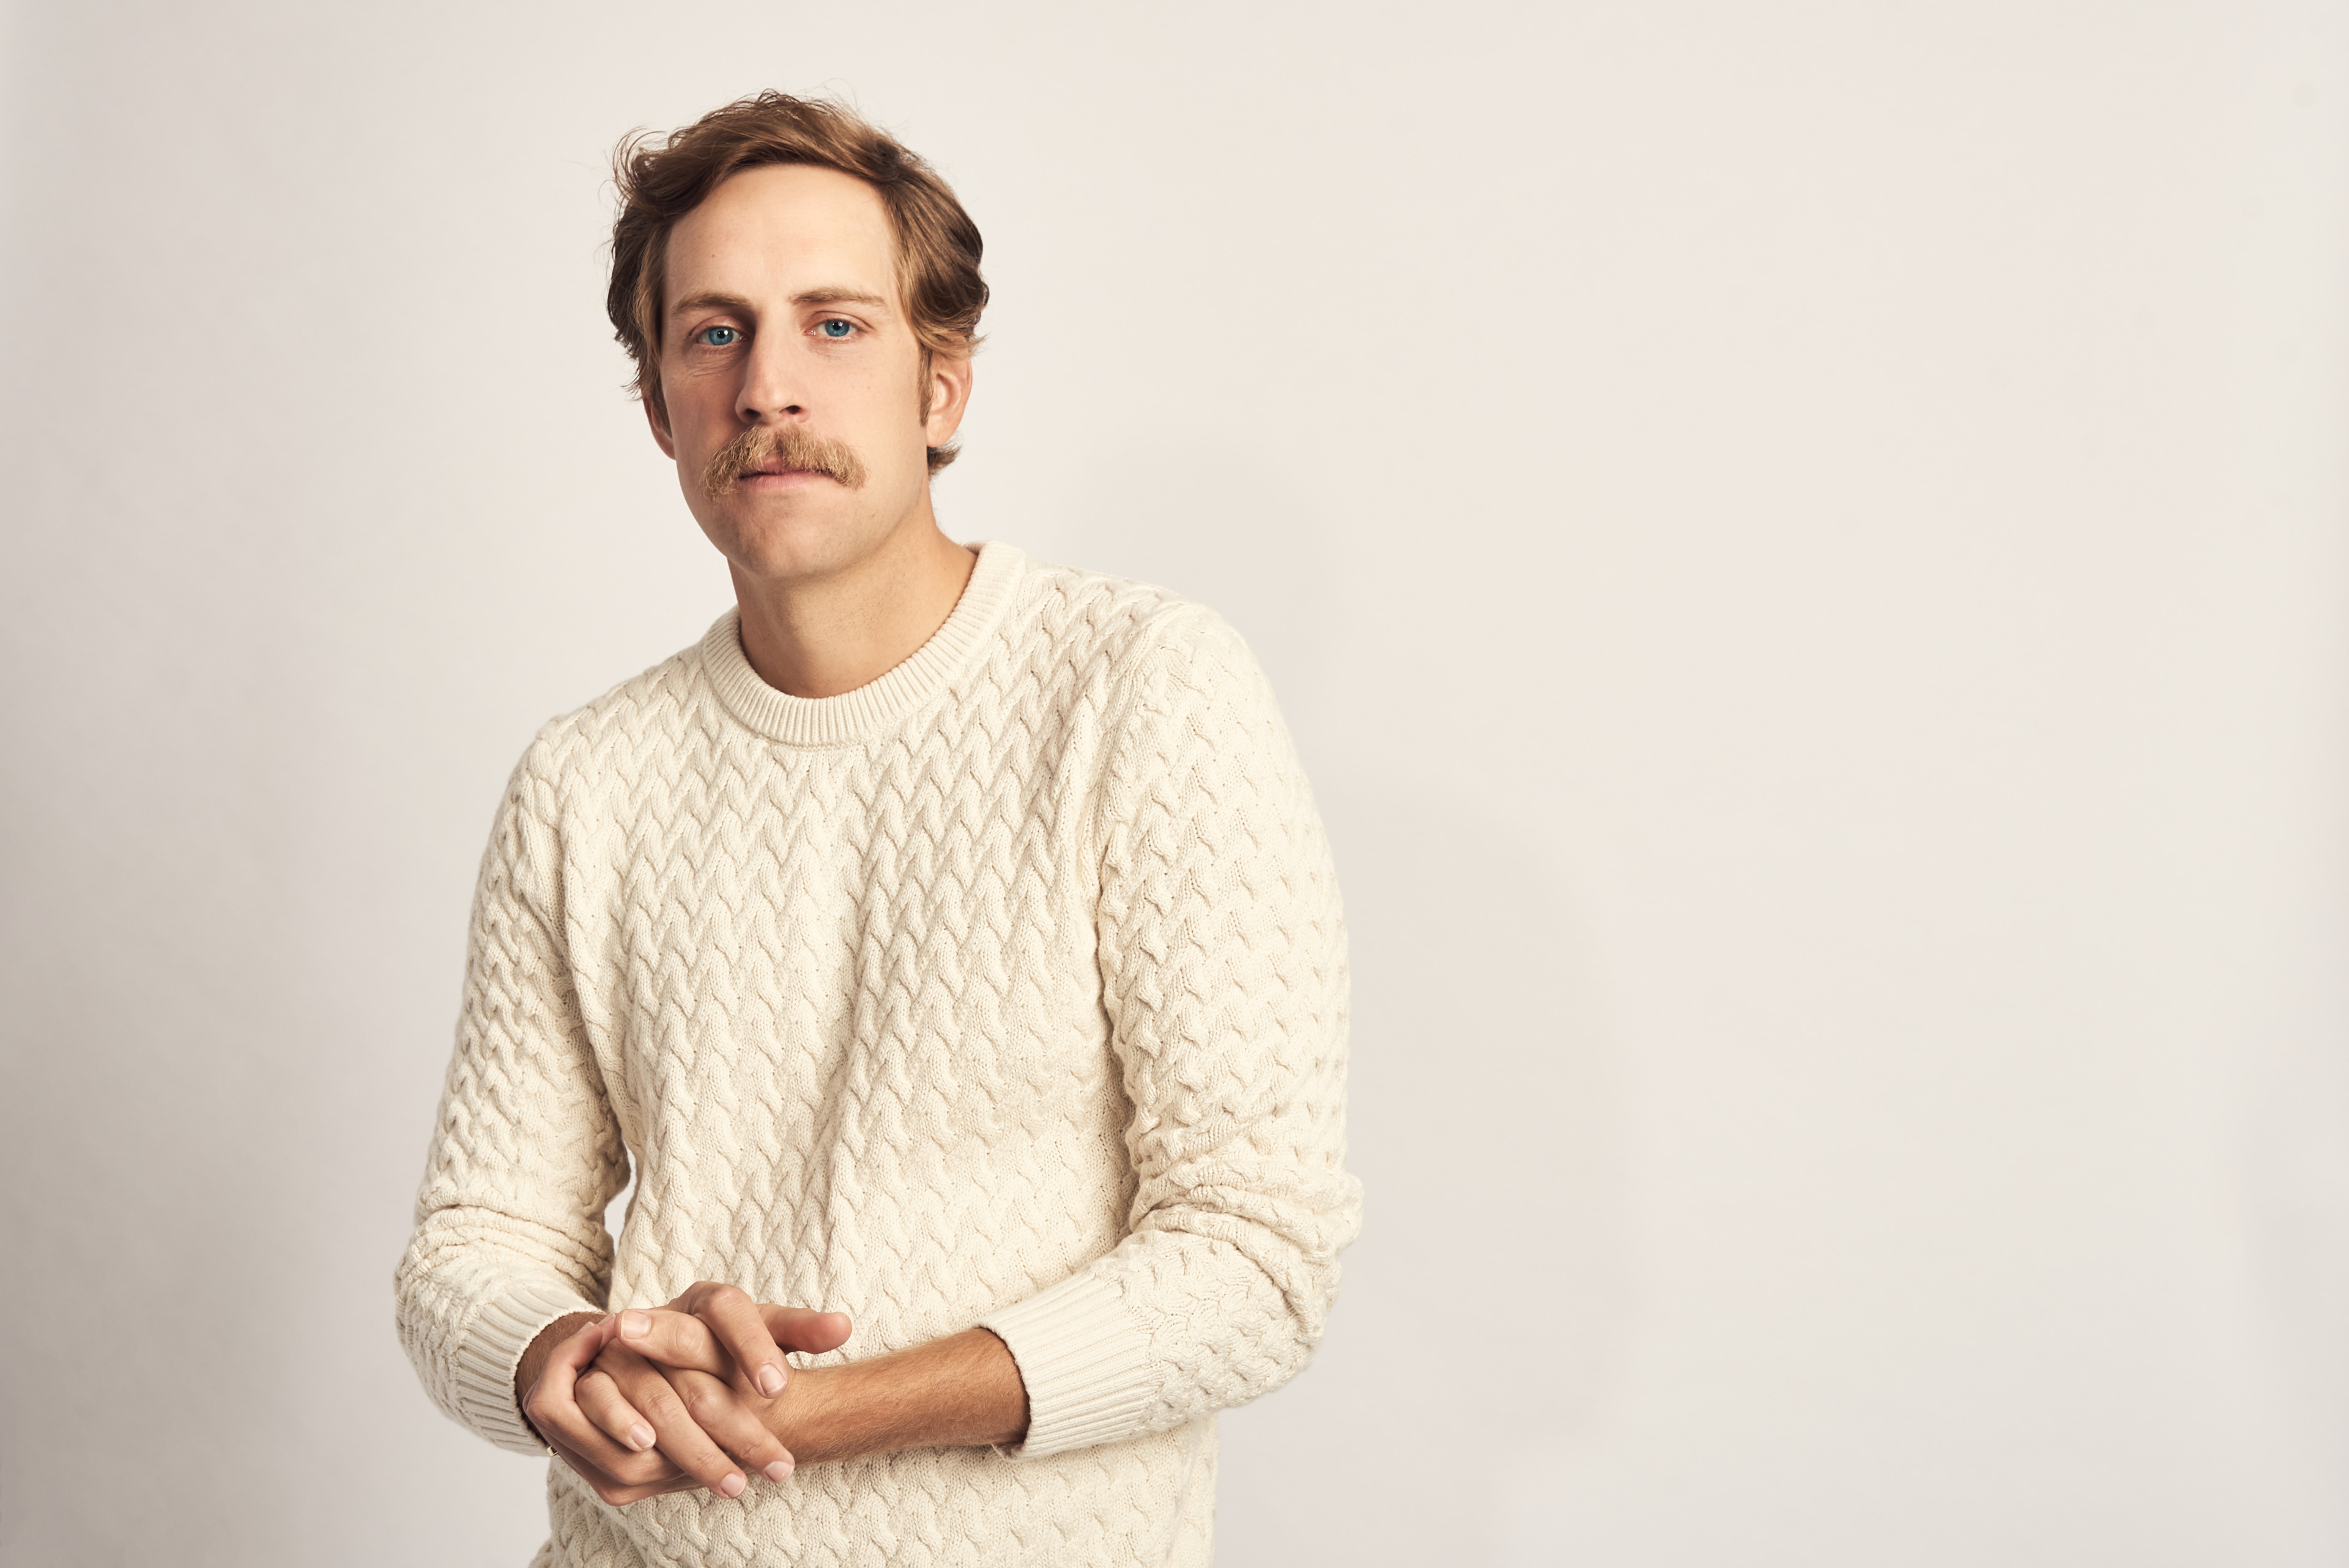 Ben Rector Starts a New Tradition with “The Thanksgiving Song”